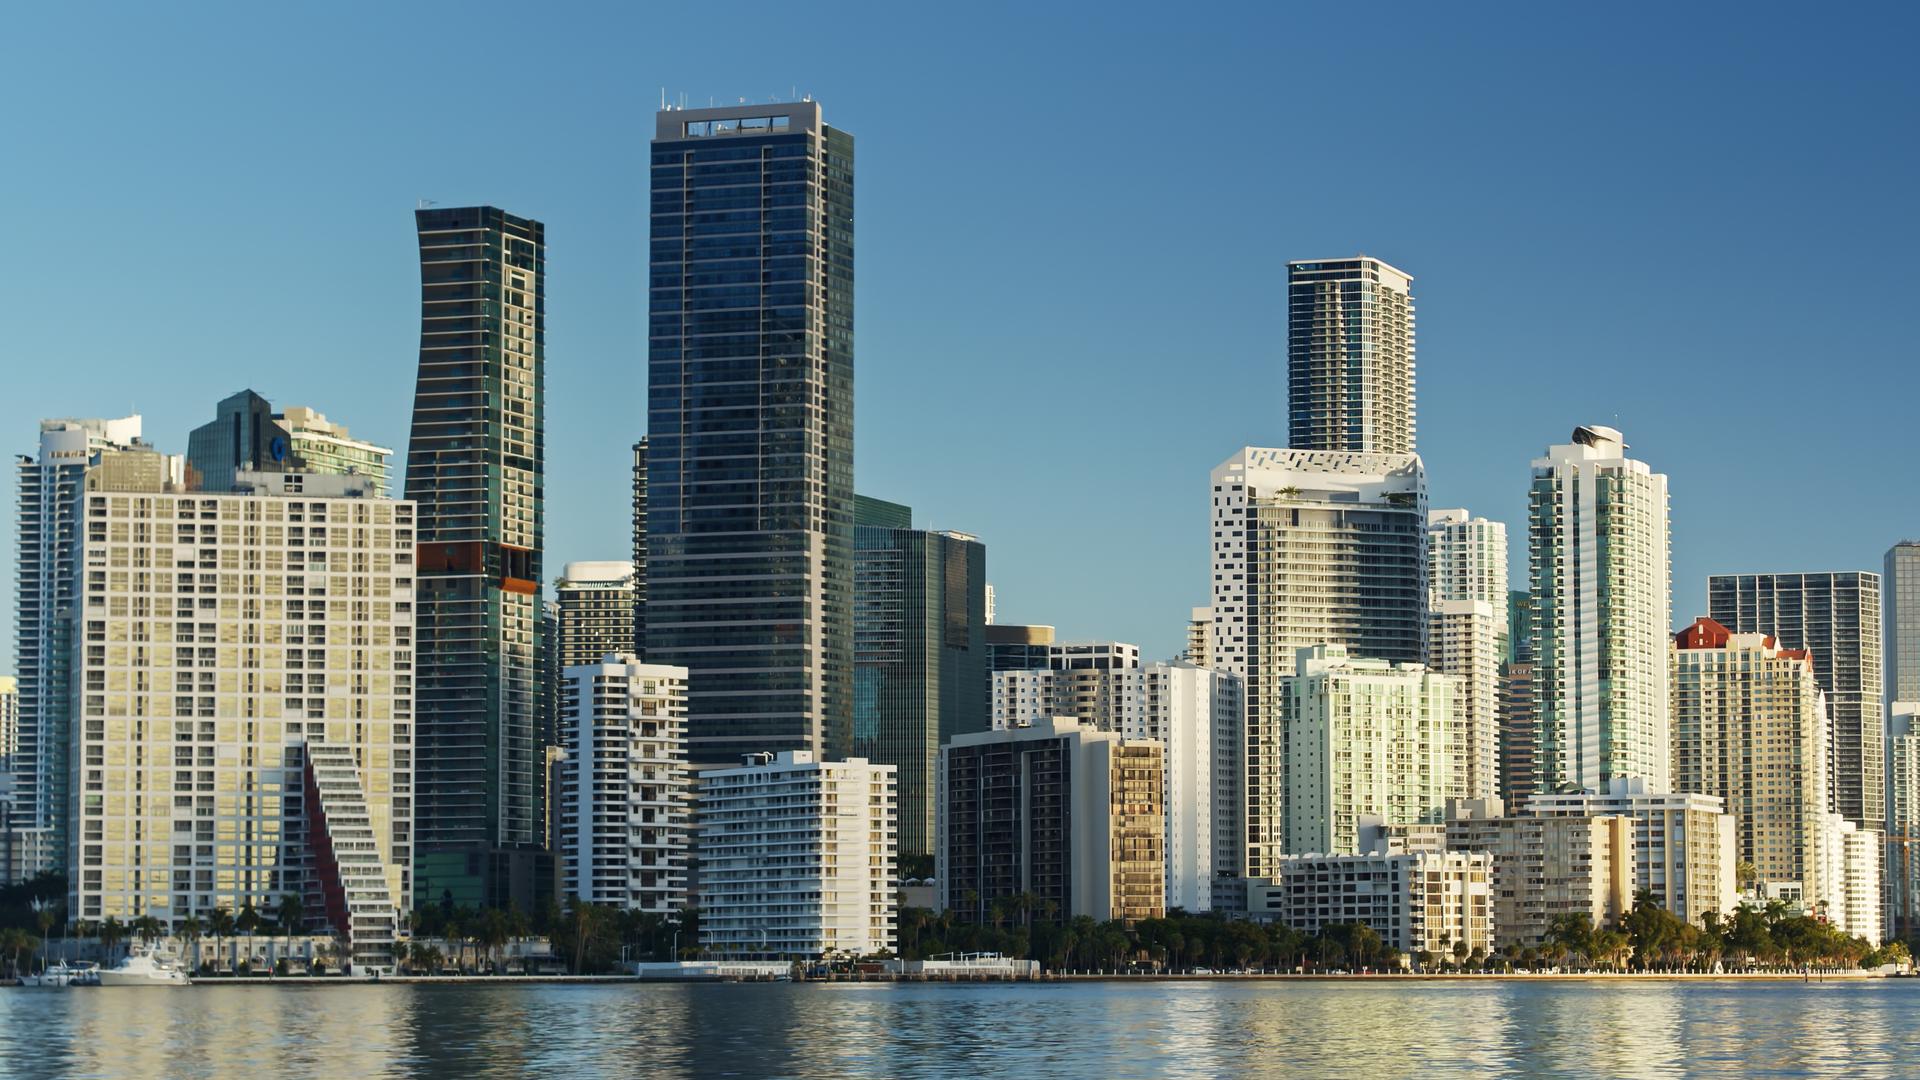 A picture of the city of Miami, where Vontobel Swiss Financial Advisers AG is located